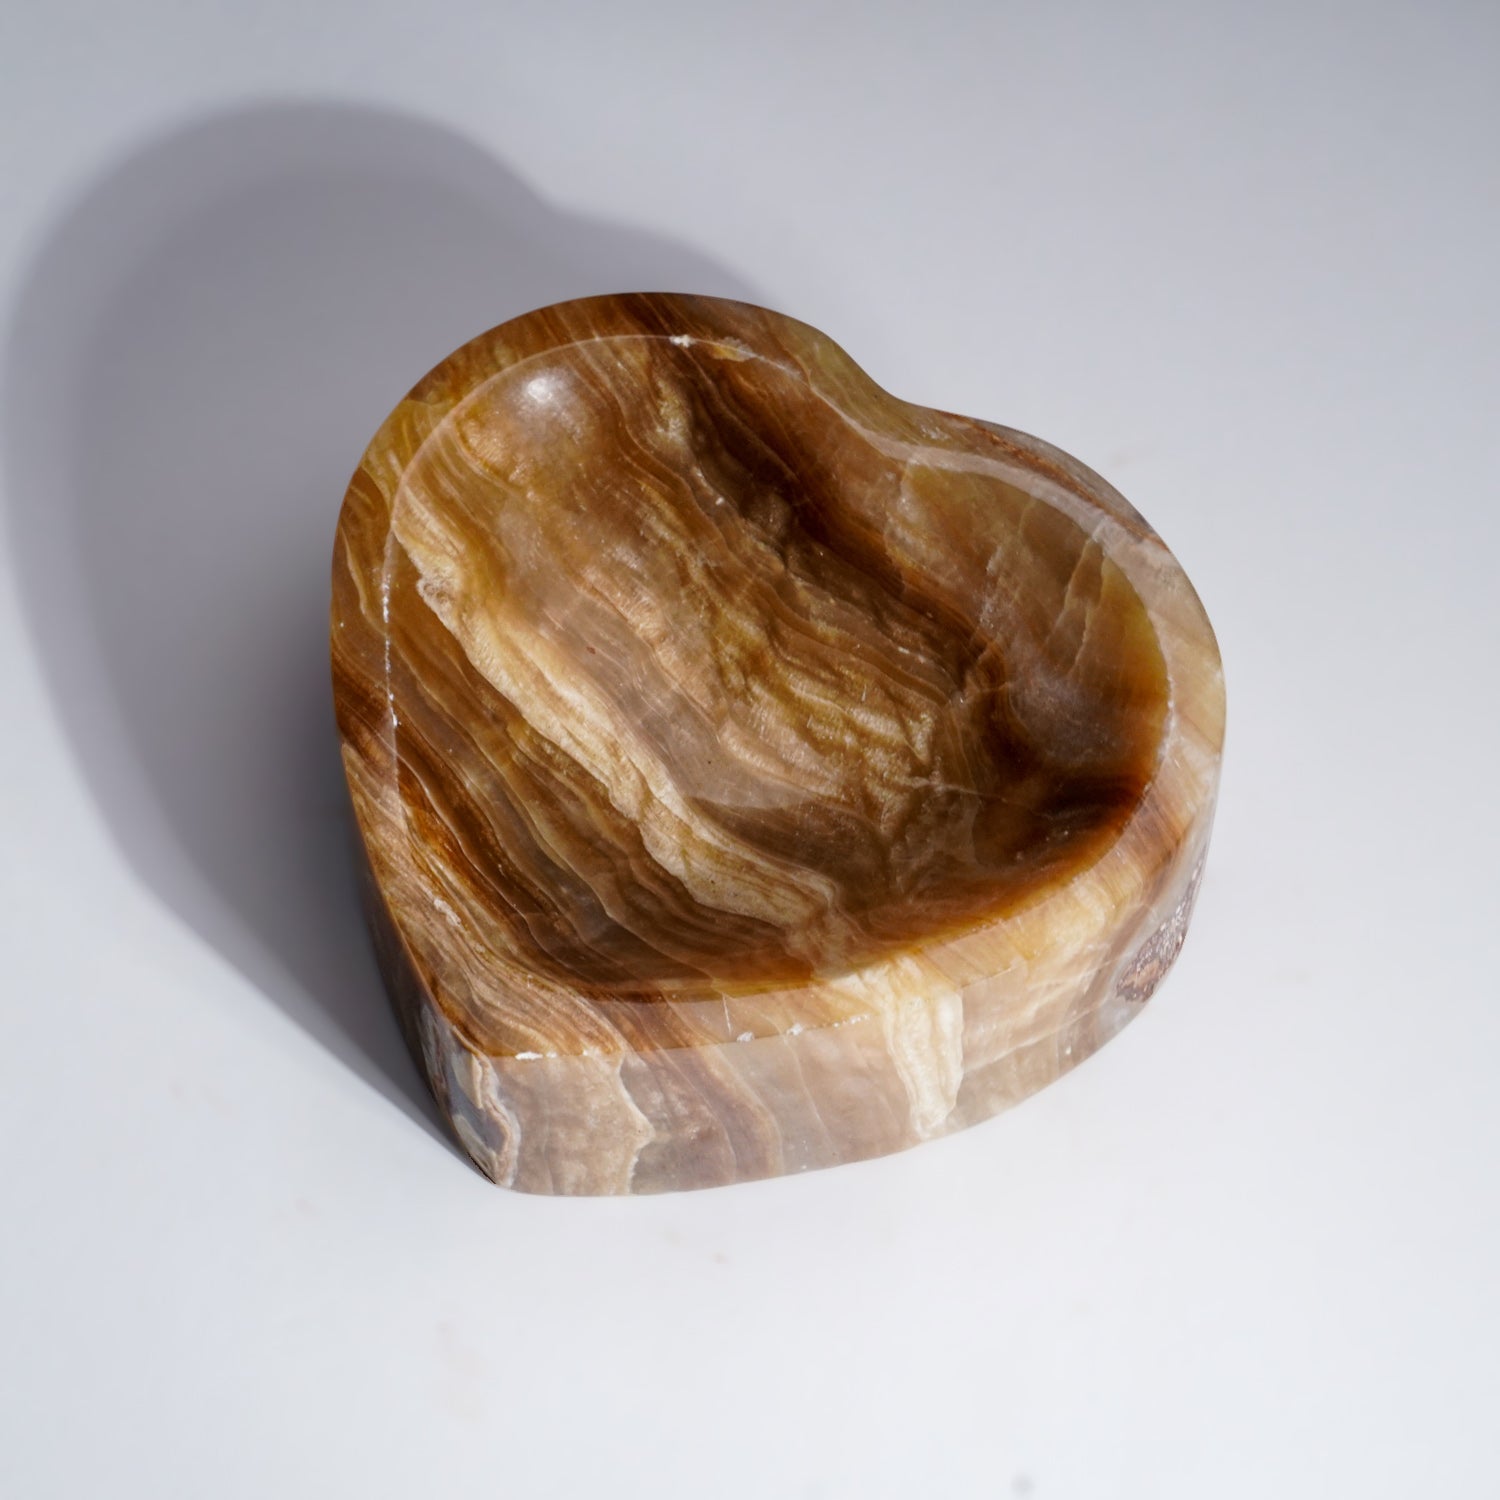 Genuine Polished Banded Calcite Heart Dish (1.9 lbs)